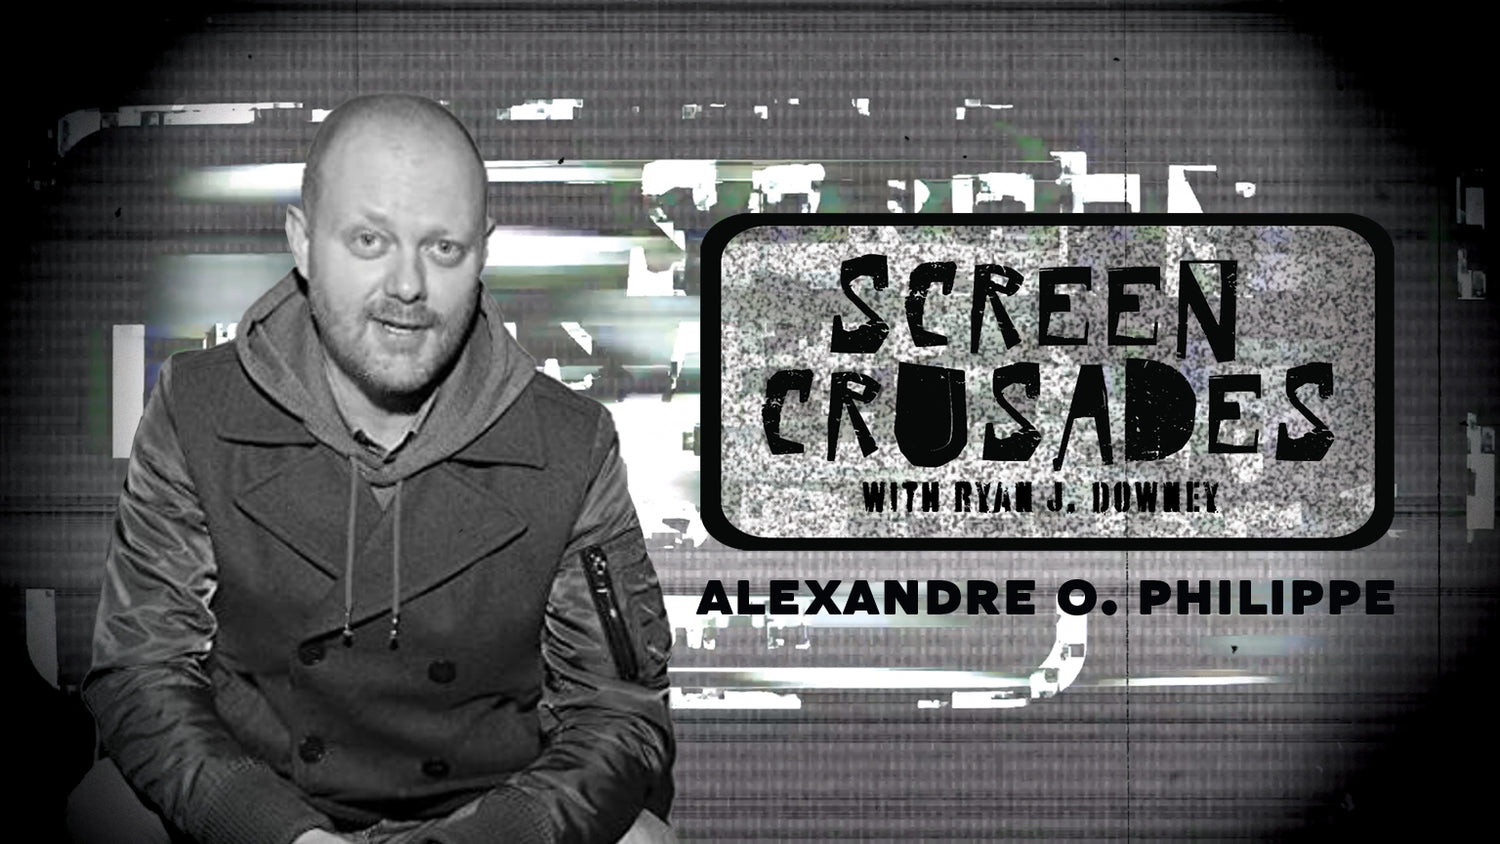 Documentary filmmaker Alexandre O. Philippe shares his immersive experience in The Exorcist